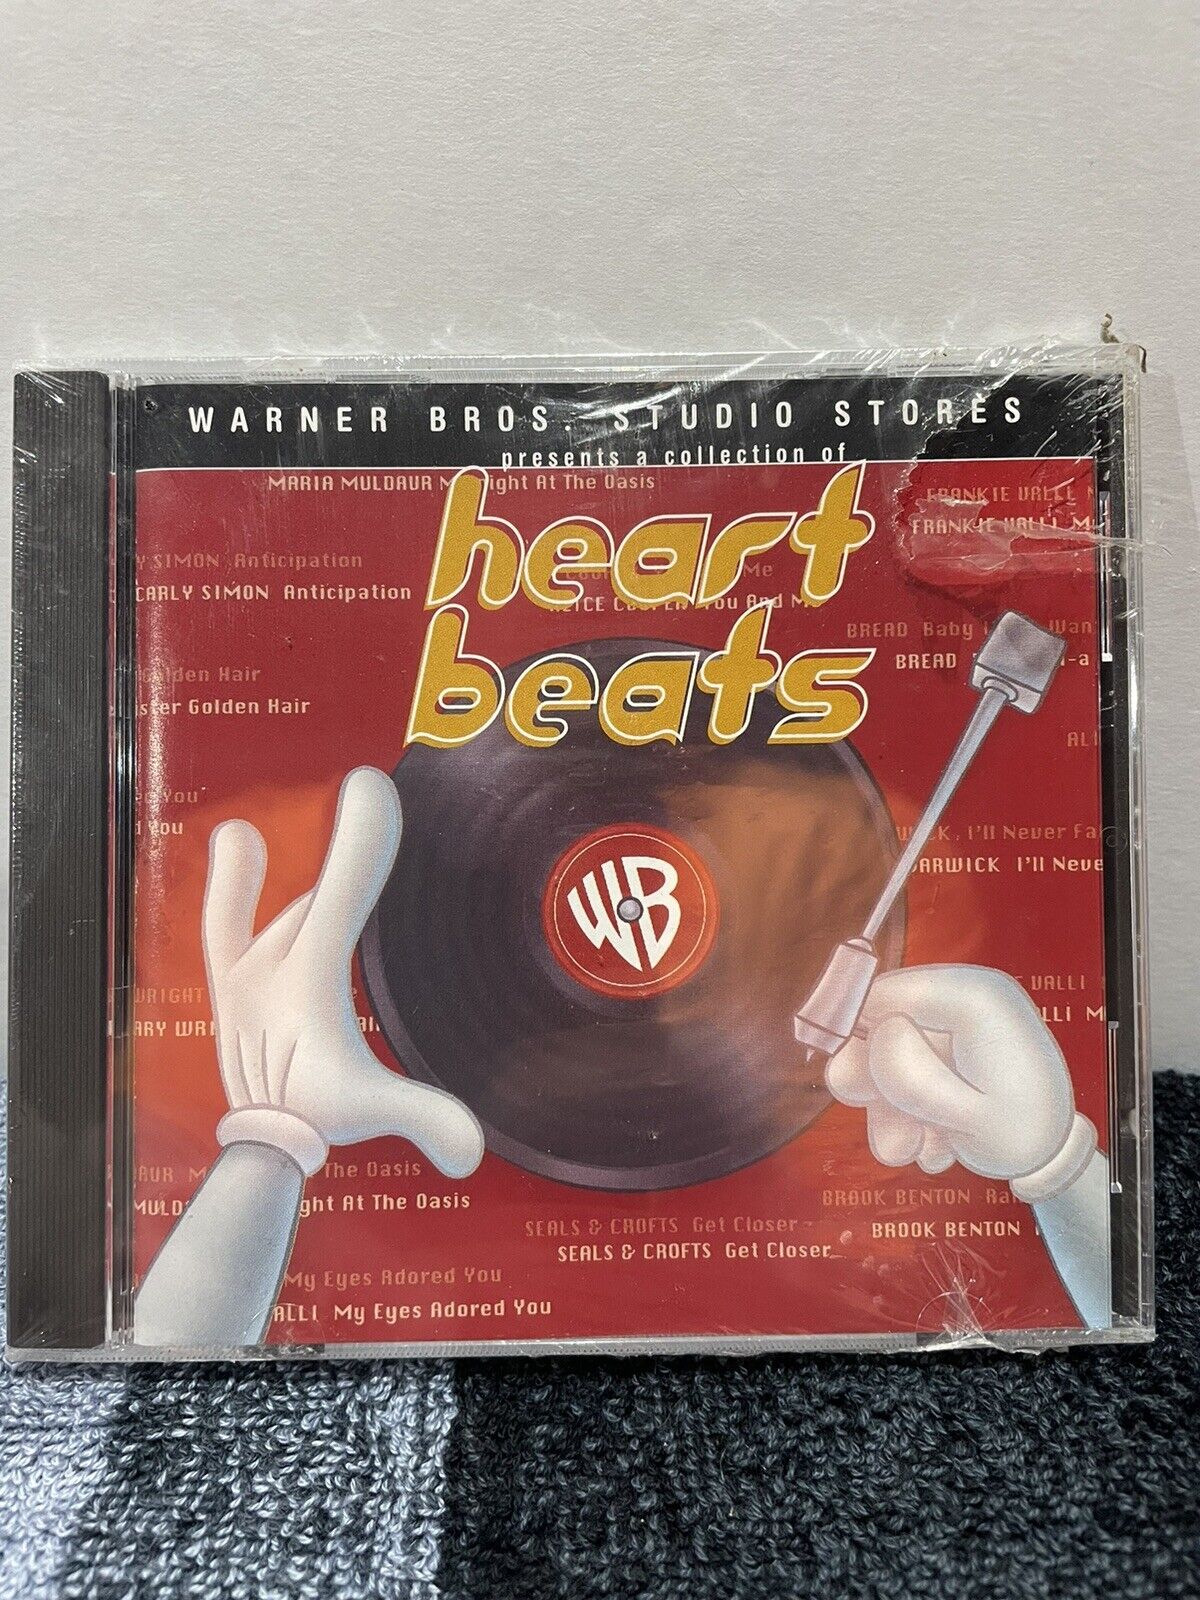 Vintage Warner Bros Studio Stores Presents A Collection Of  Heart Beats 1998 Cd